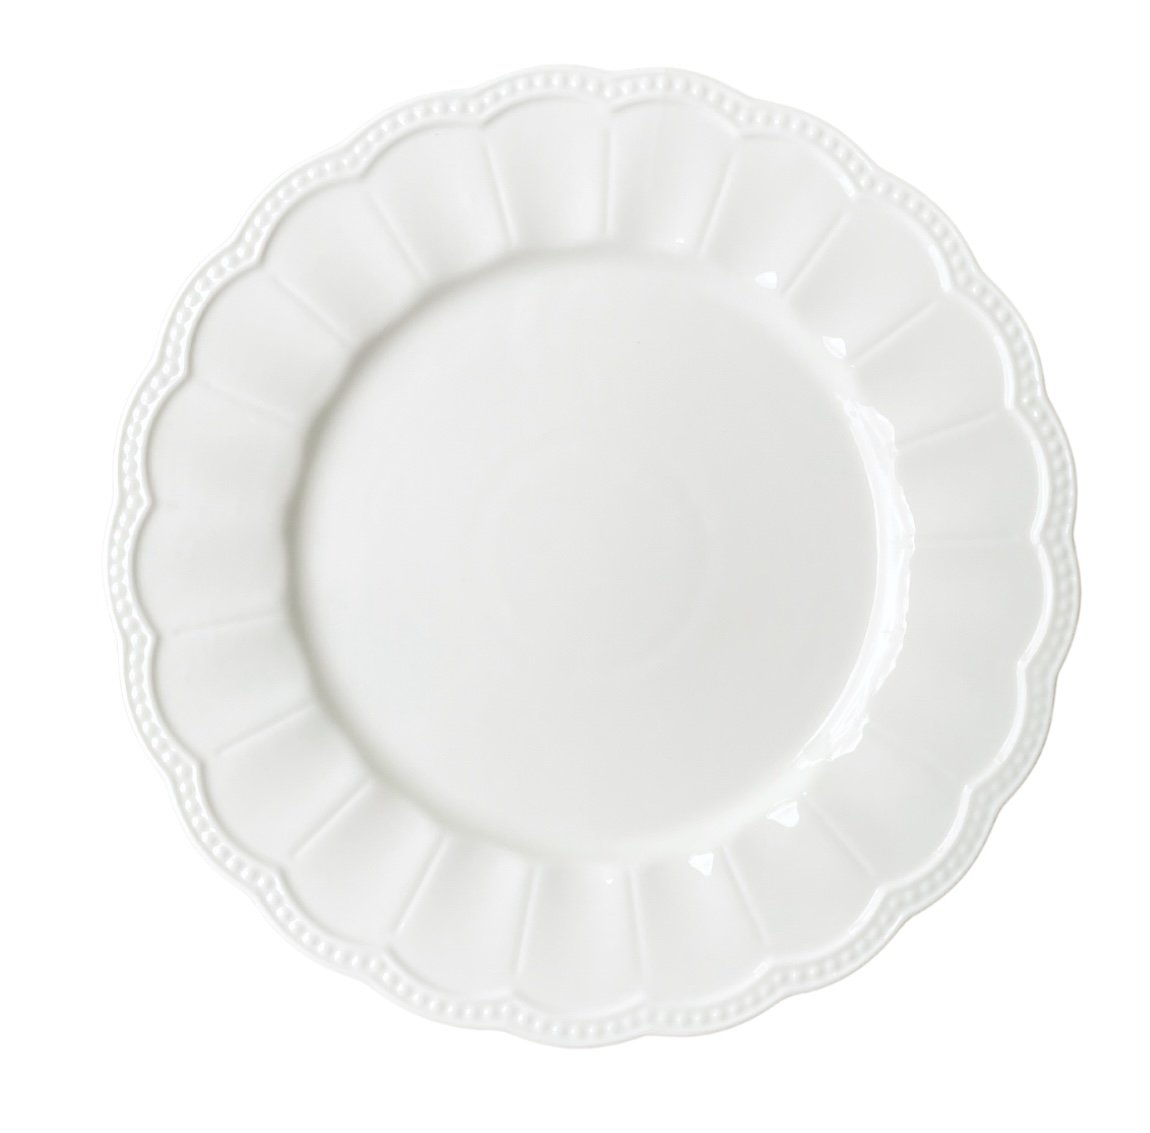 Scallop White Charger Plate Hire